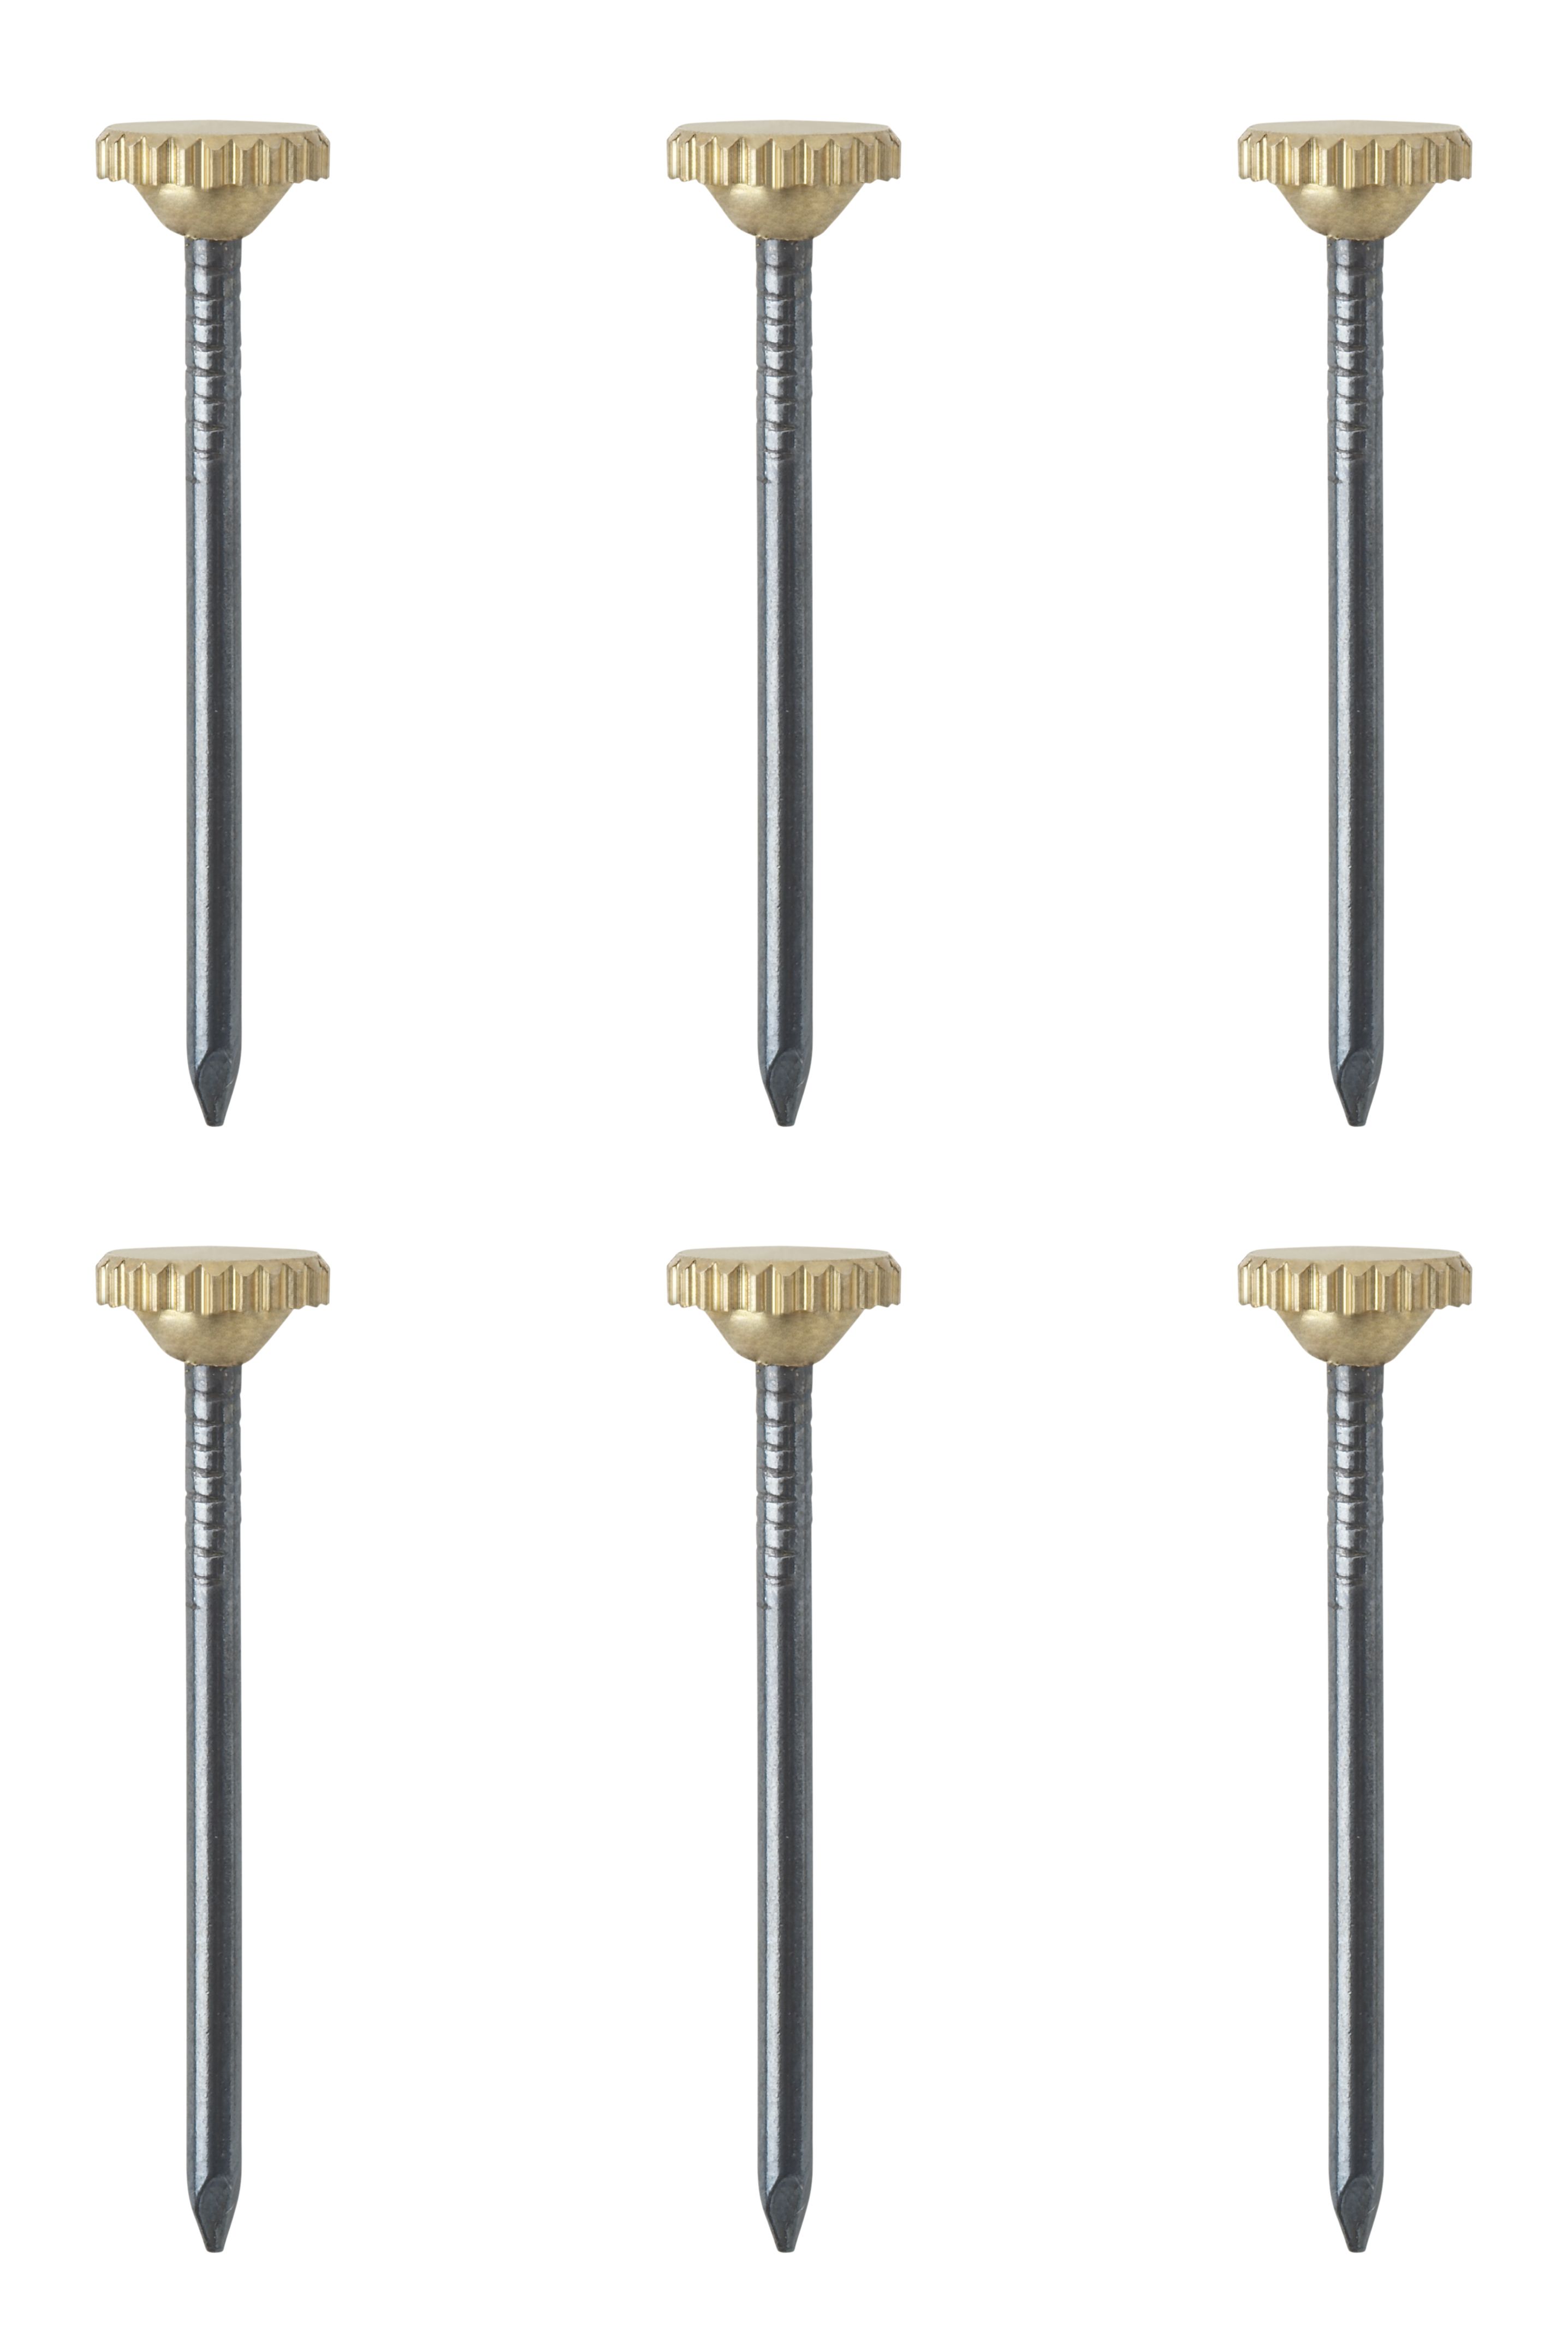 B&Q Picture pin (L)26.5mm (Dia)1.5mm, Pack of 6